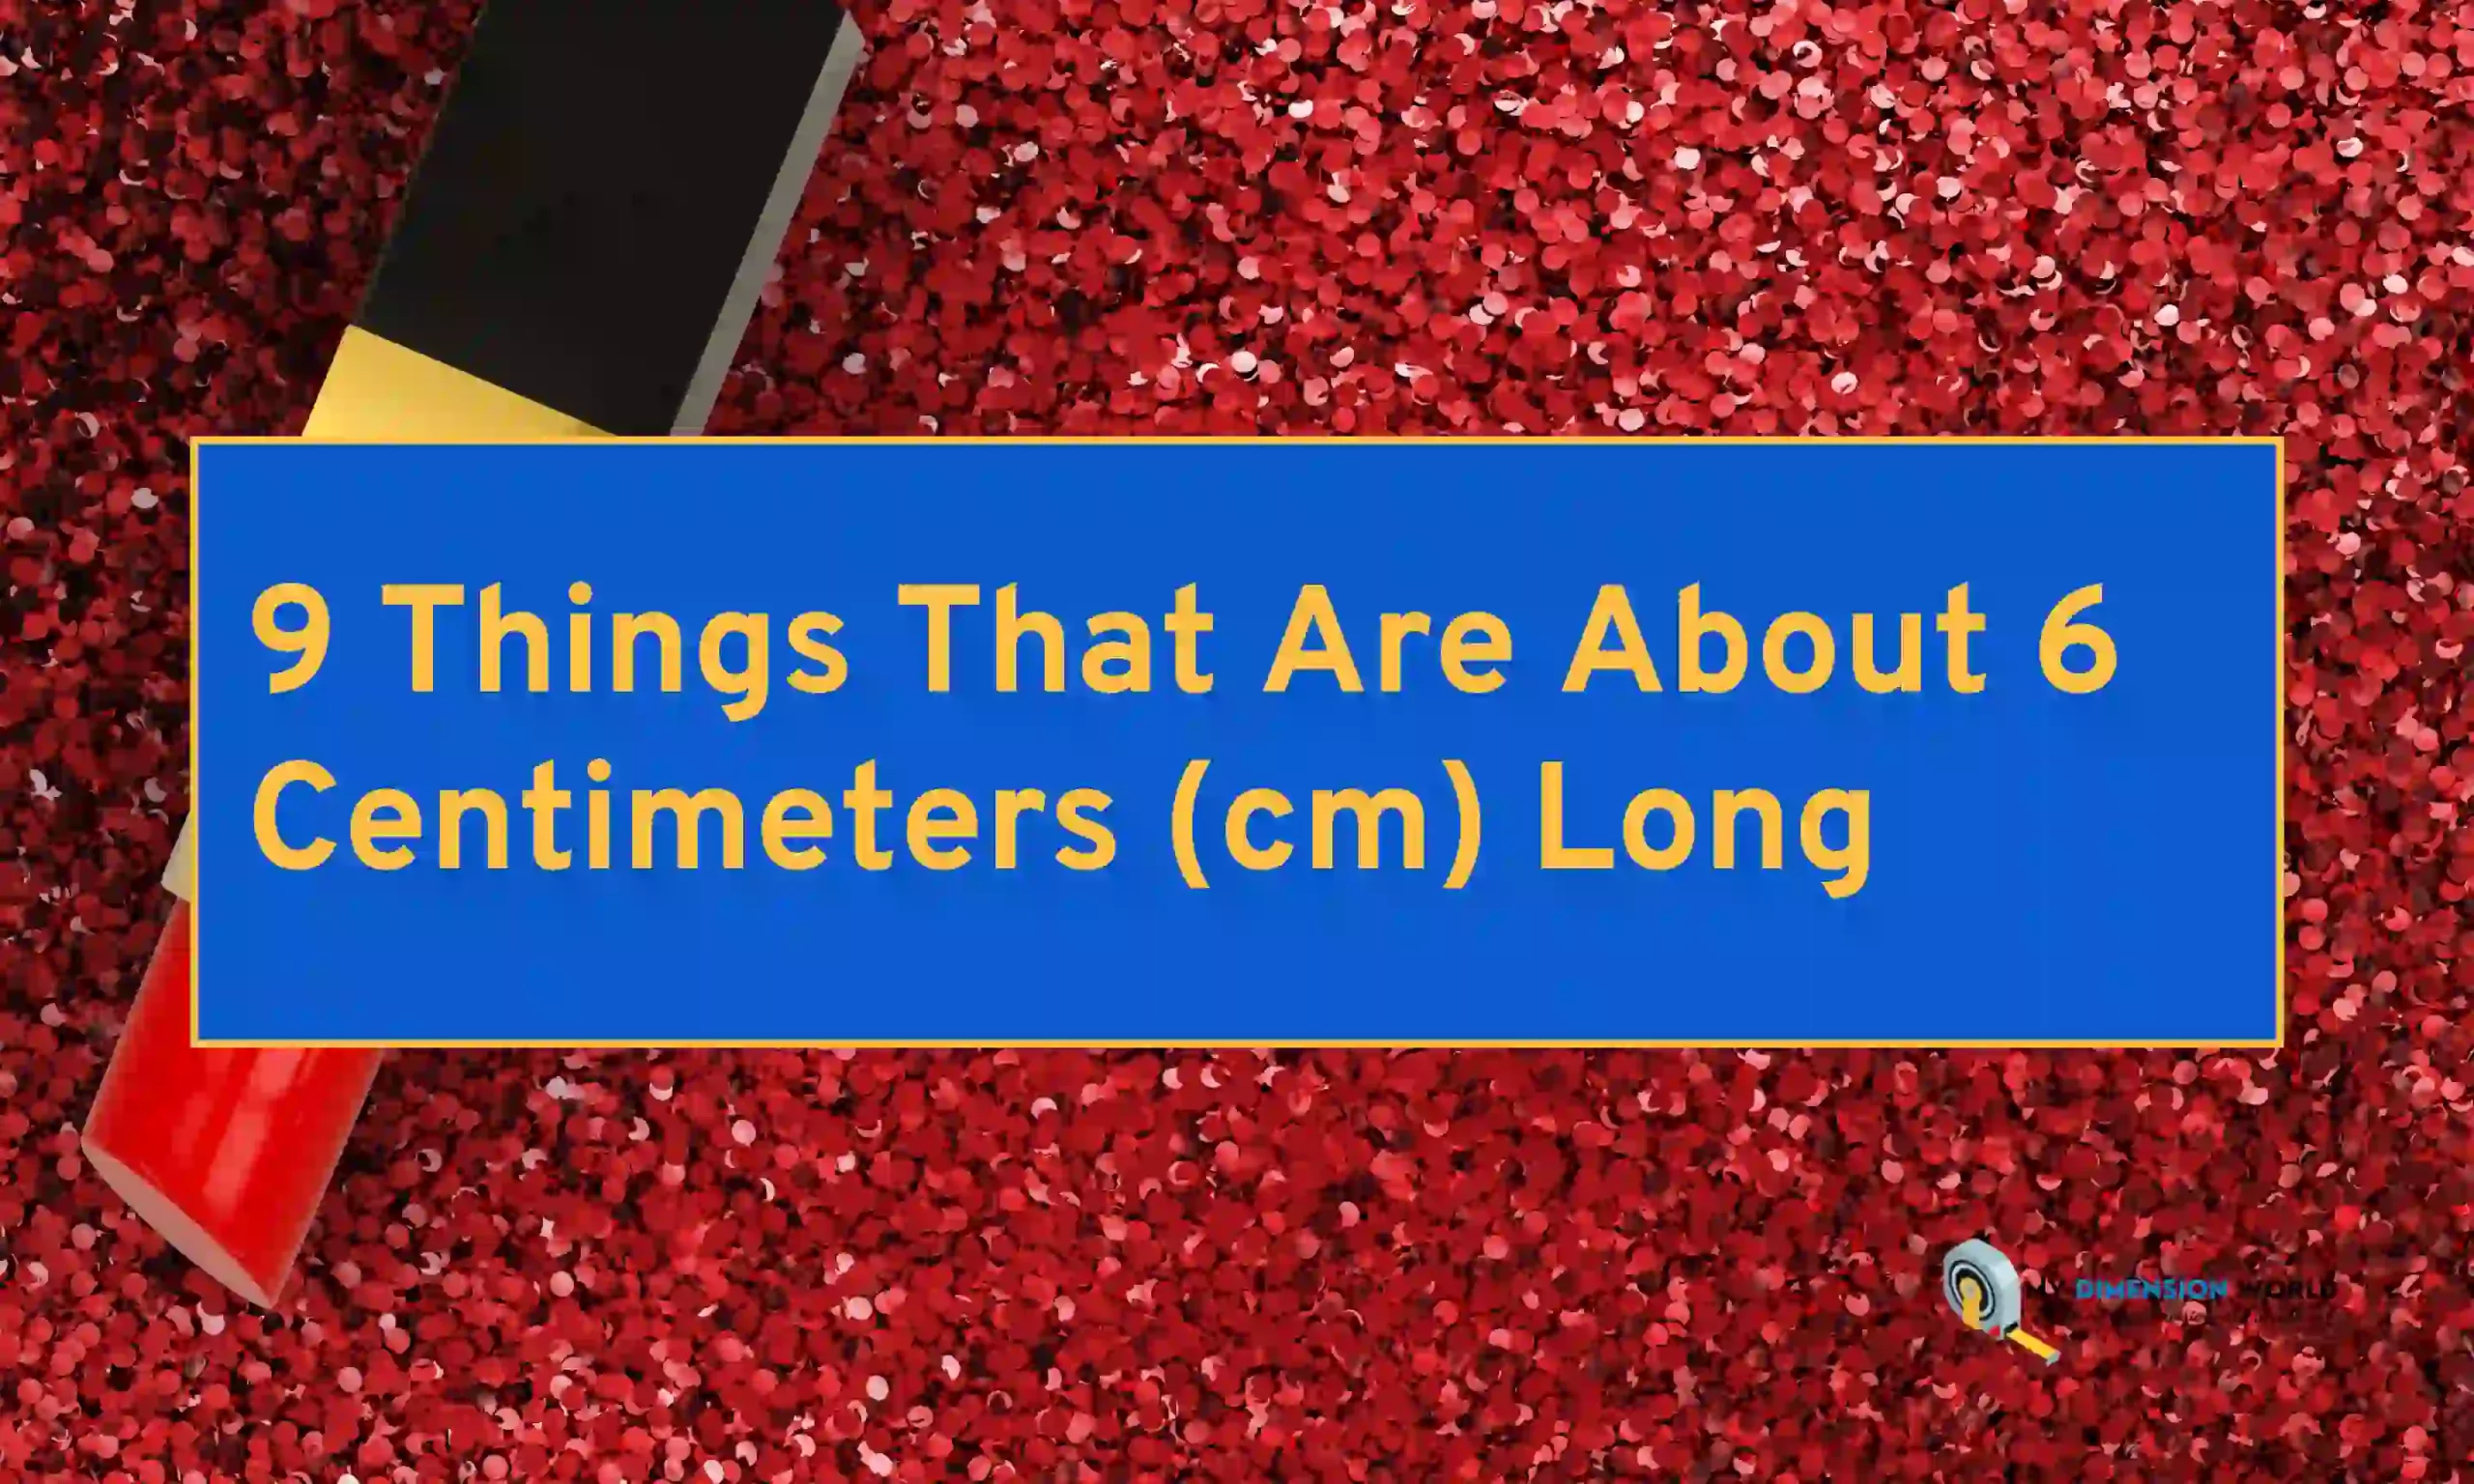 9 Things That Are About 6 Centimeters (cm) Long